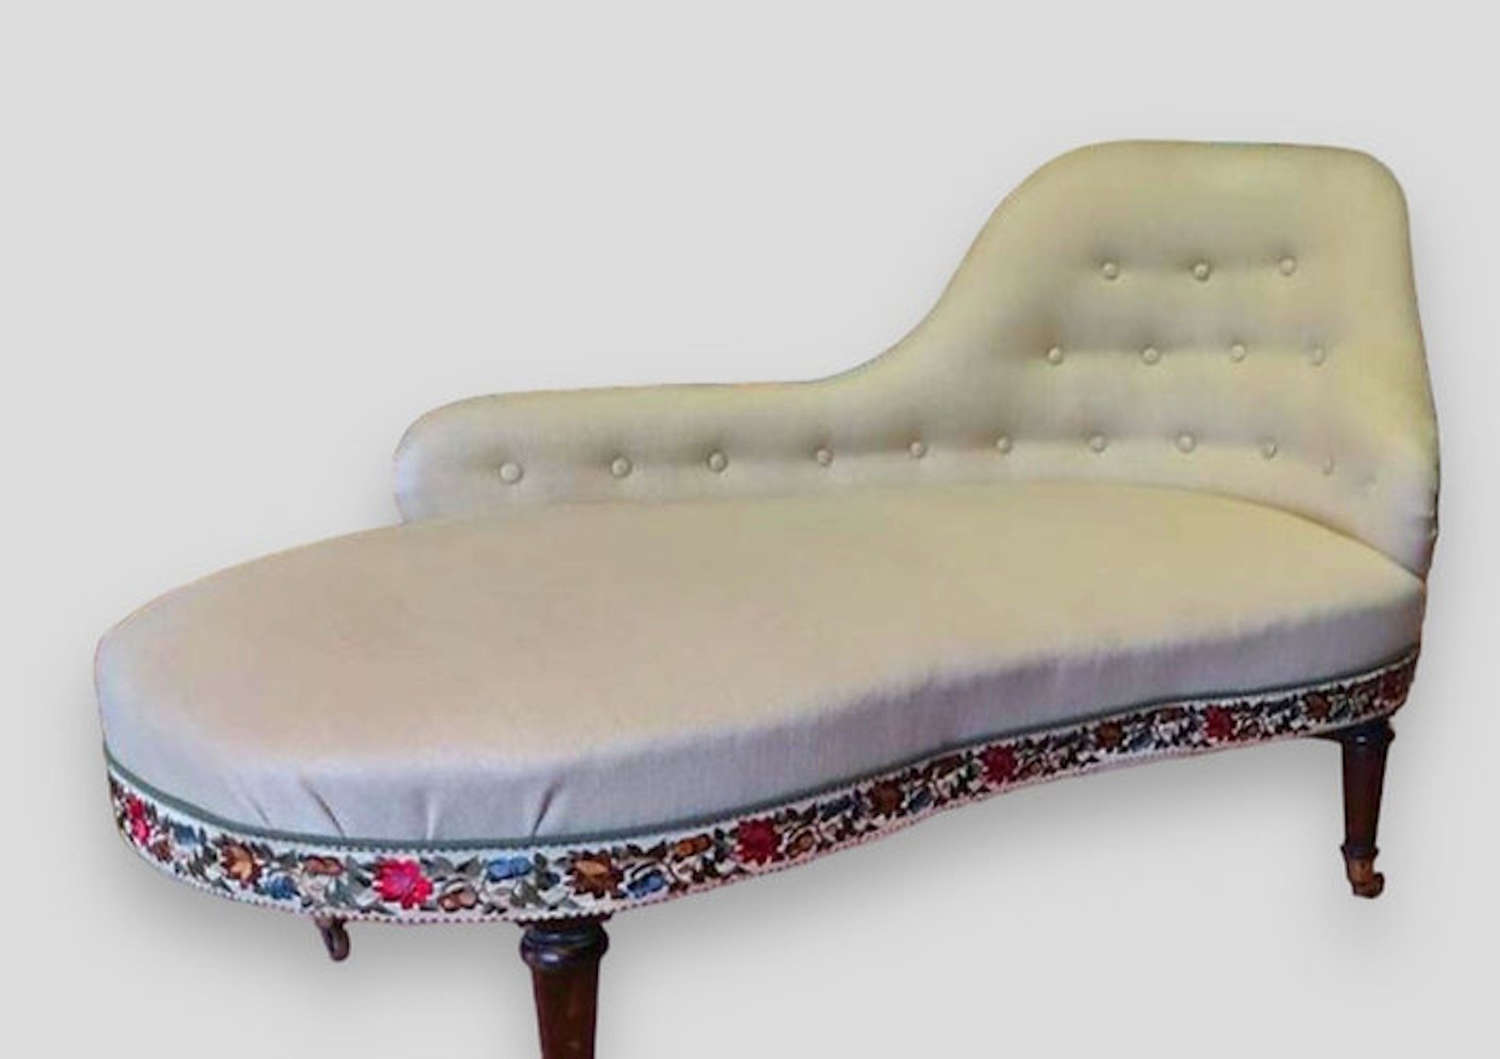 A Petite 1950's Chaise Longue in Colefax and Fowler material